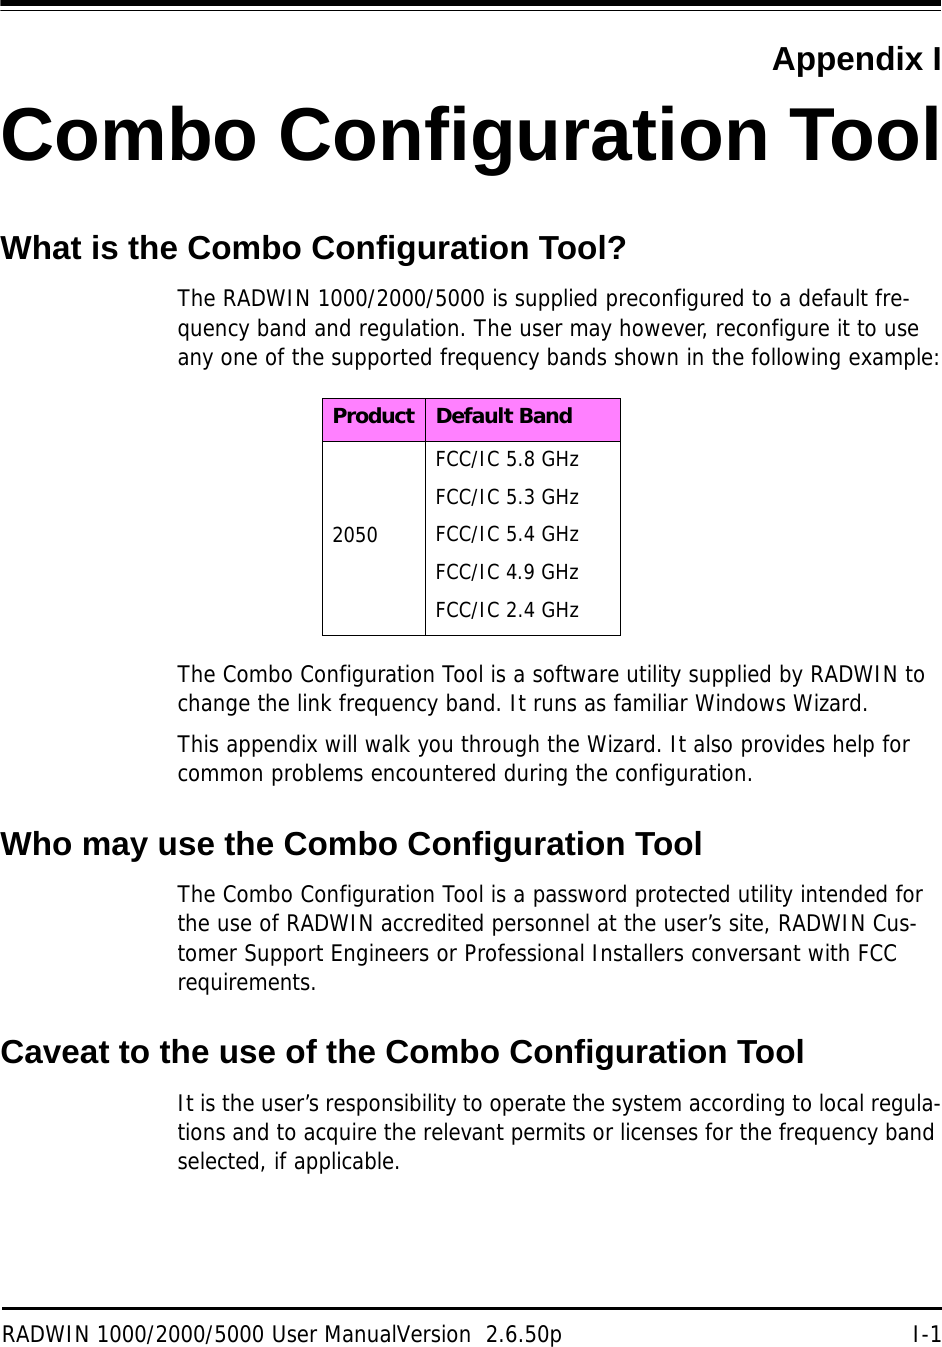 RADWIN 1000/2000/5000 User ManualVersion  2.6.50p I-1Appendix ICombo Configuration ToolWhat is the Combo Configuration Tool?The RADWIN 1000/2000/5000 is supplied preconfigured to a default fre-quency band and regulation. The user may however, reconfigure it to use any one of the supported frequency bands shown in the following example:The Combo Configuration Tool is a software utility supplied by RADWIN to change the link frequency band. It runs as familiar Windows Wizard.This appendix will walk you through the Wizard. It also provides help for common problems encountered during the configuration.Who may use the Combo Configuration ToolThe Combo Configuration Tool is a password protected utility intended for the use of RADWIN accredited personnel at the user’s site, RADWIN Cus-tomer Support Engineers or Professional Installers conversant with FCC requirements.Caveat to the use of the Combo Configuration ToolIt is the user’s responsibility to operate the system according to local regula-tions and to acquire the relevant permits or licenses for the frequency band selected, if applicable.Product Default Band2050FCC/IC 5.8 GHzFCC/IC 5.3 GHzFCC/IC 5.4 GHzFCC/IC 4.9 GHzFCC/IC 2.4 GHz